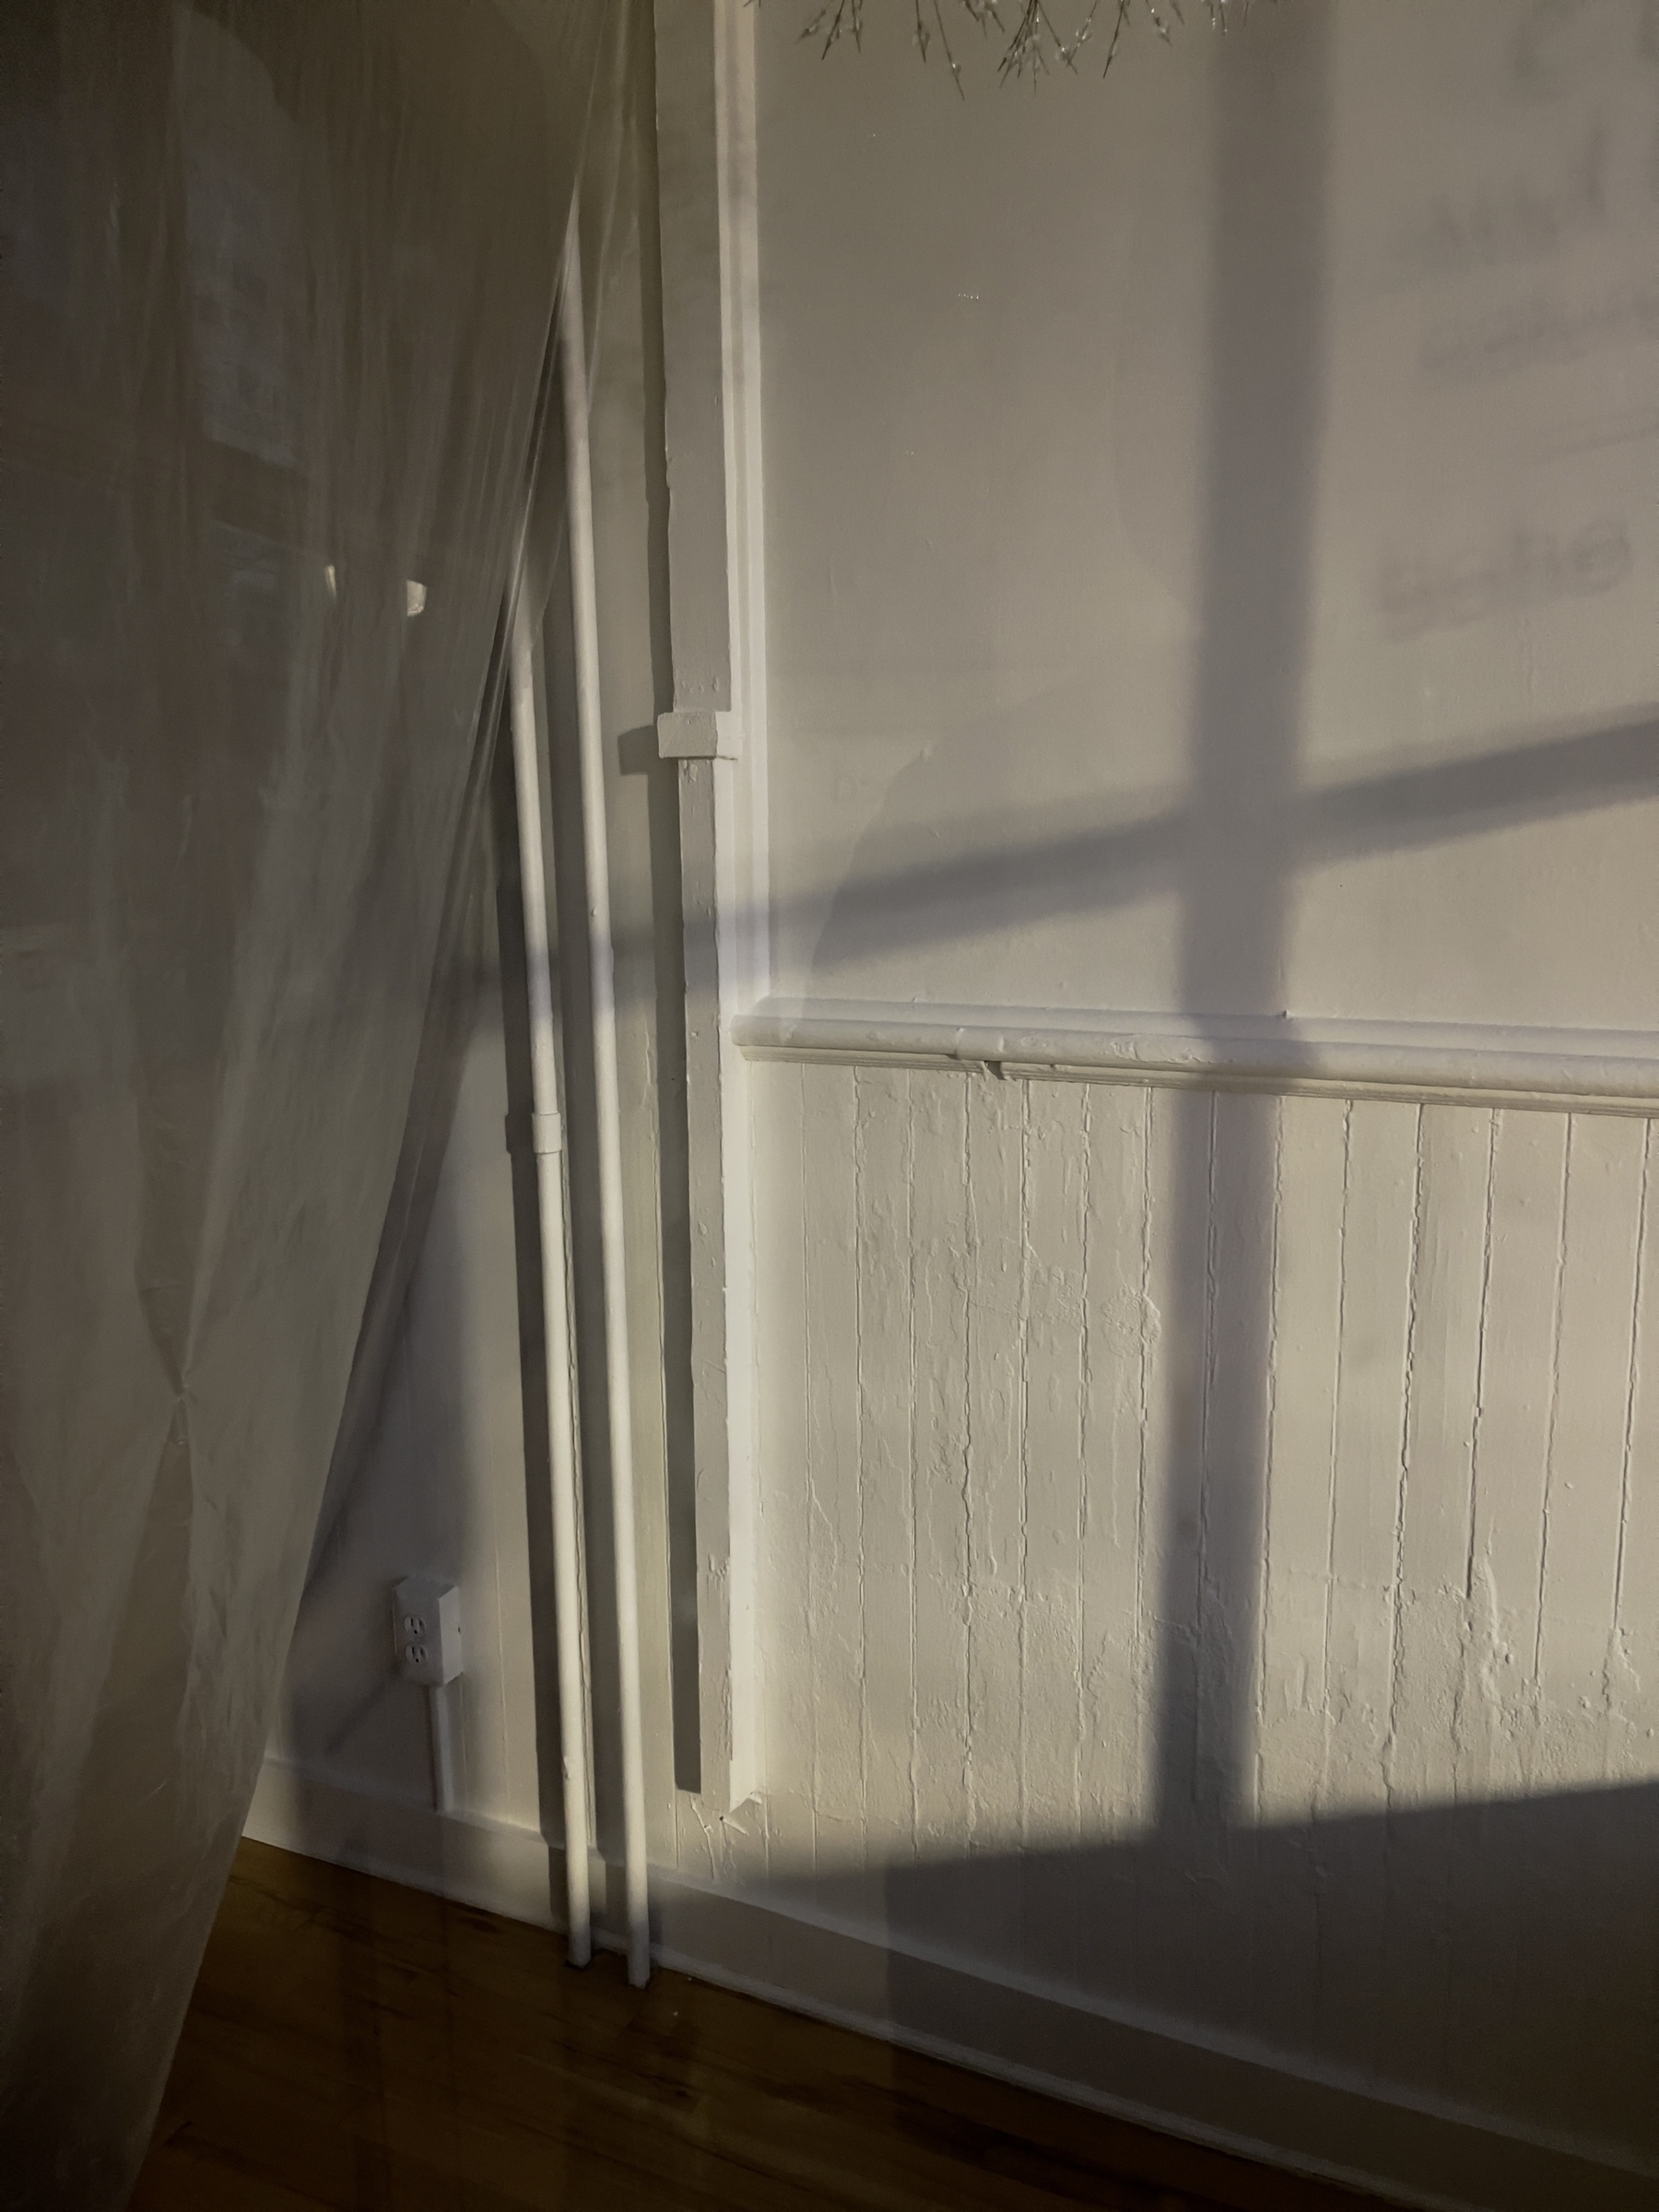 Shadow of window mullions cast across a wall with paneling and molding.